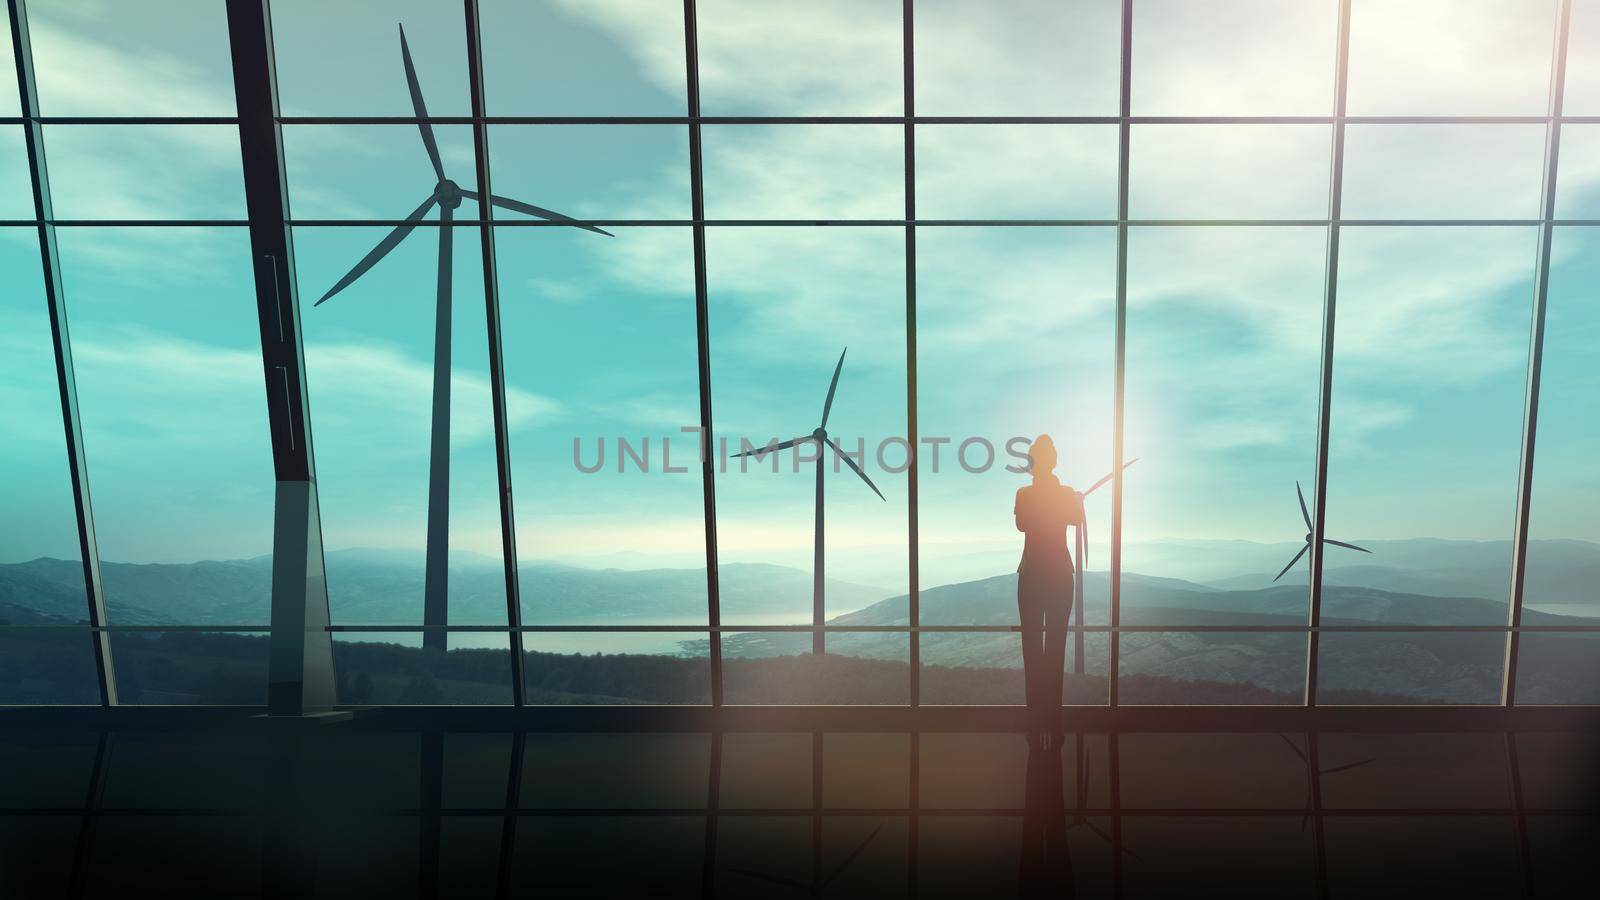 A silhouette of a business woman is standing against an office window overlooking the wind farms.